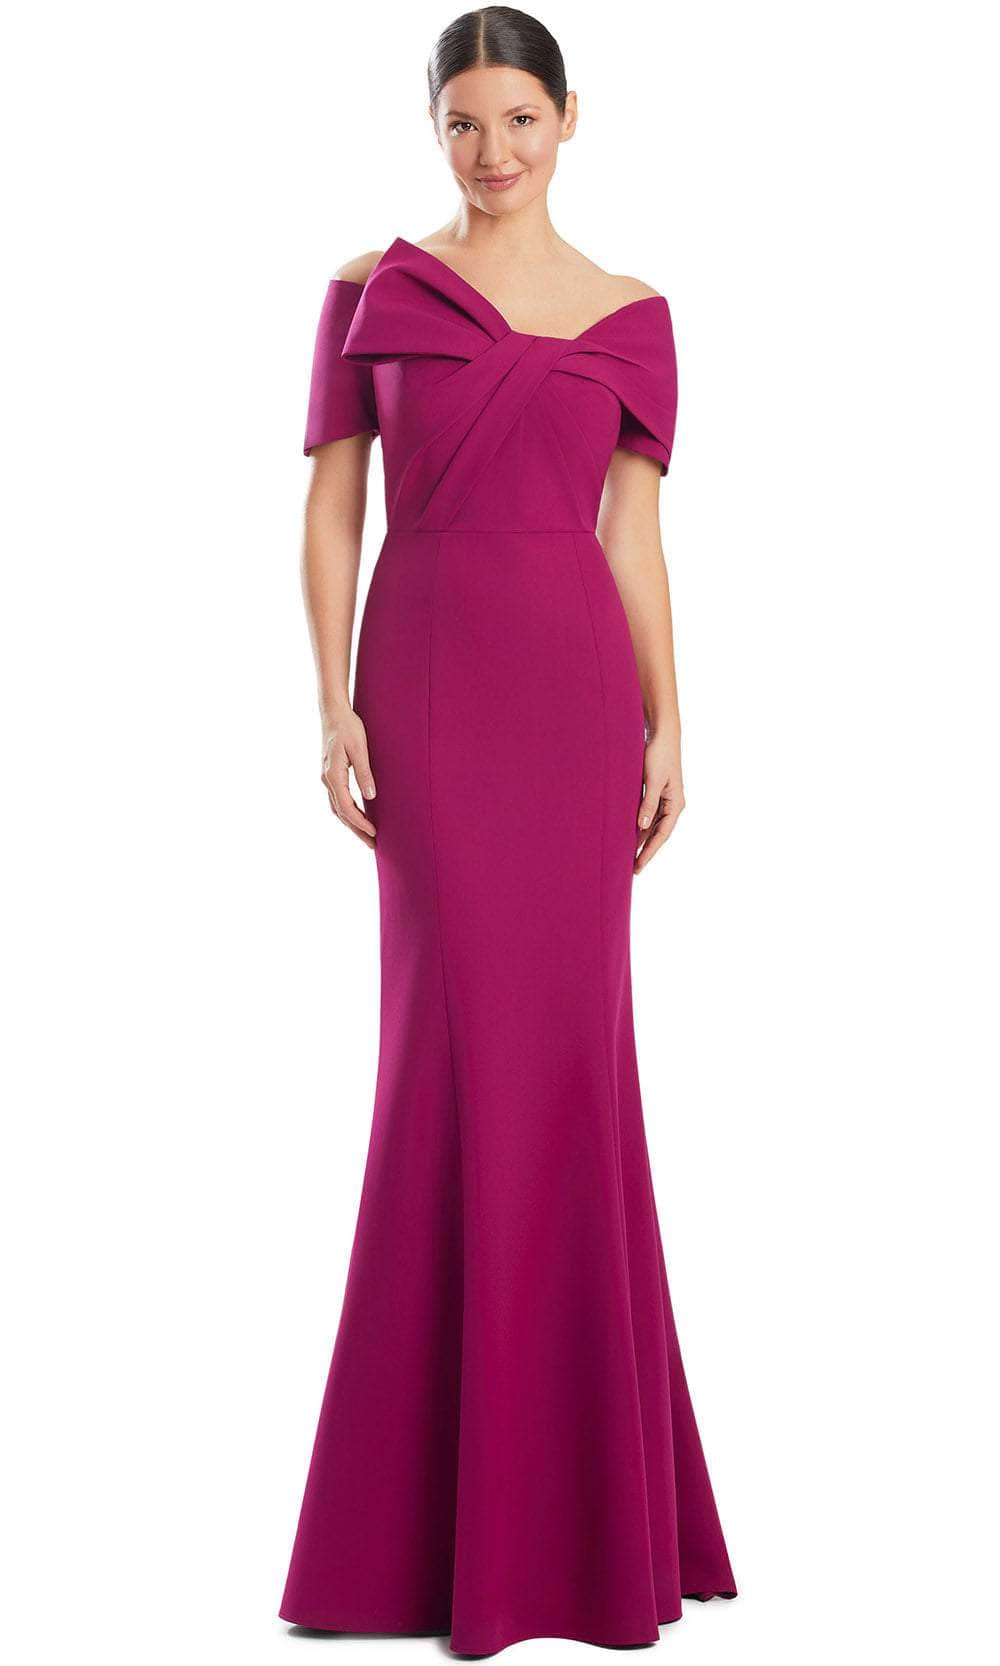 Alexander by Daymor 1954S24 - Short Sleeve Fitted Evening Dress Mother of the Bride Dresses 4 /  Magenta